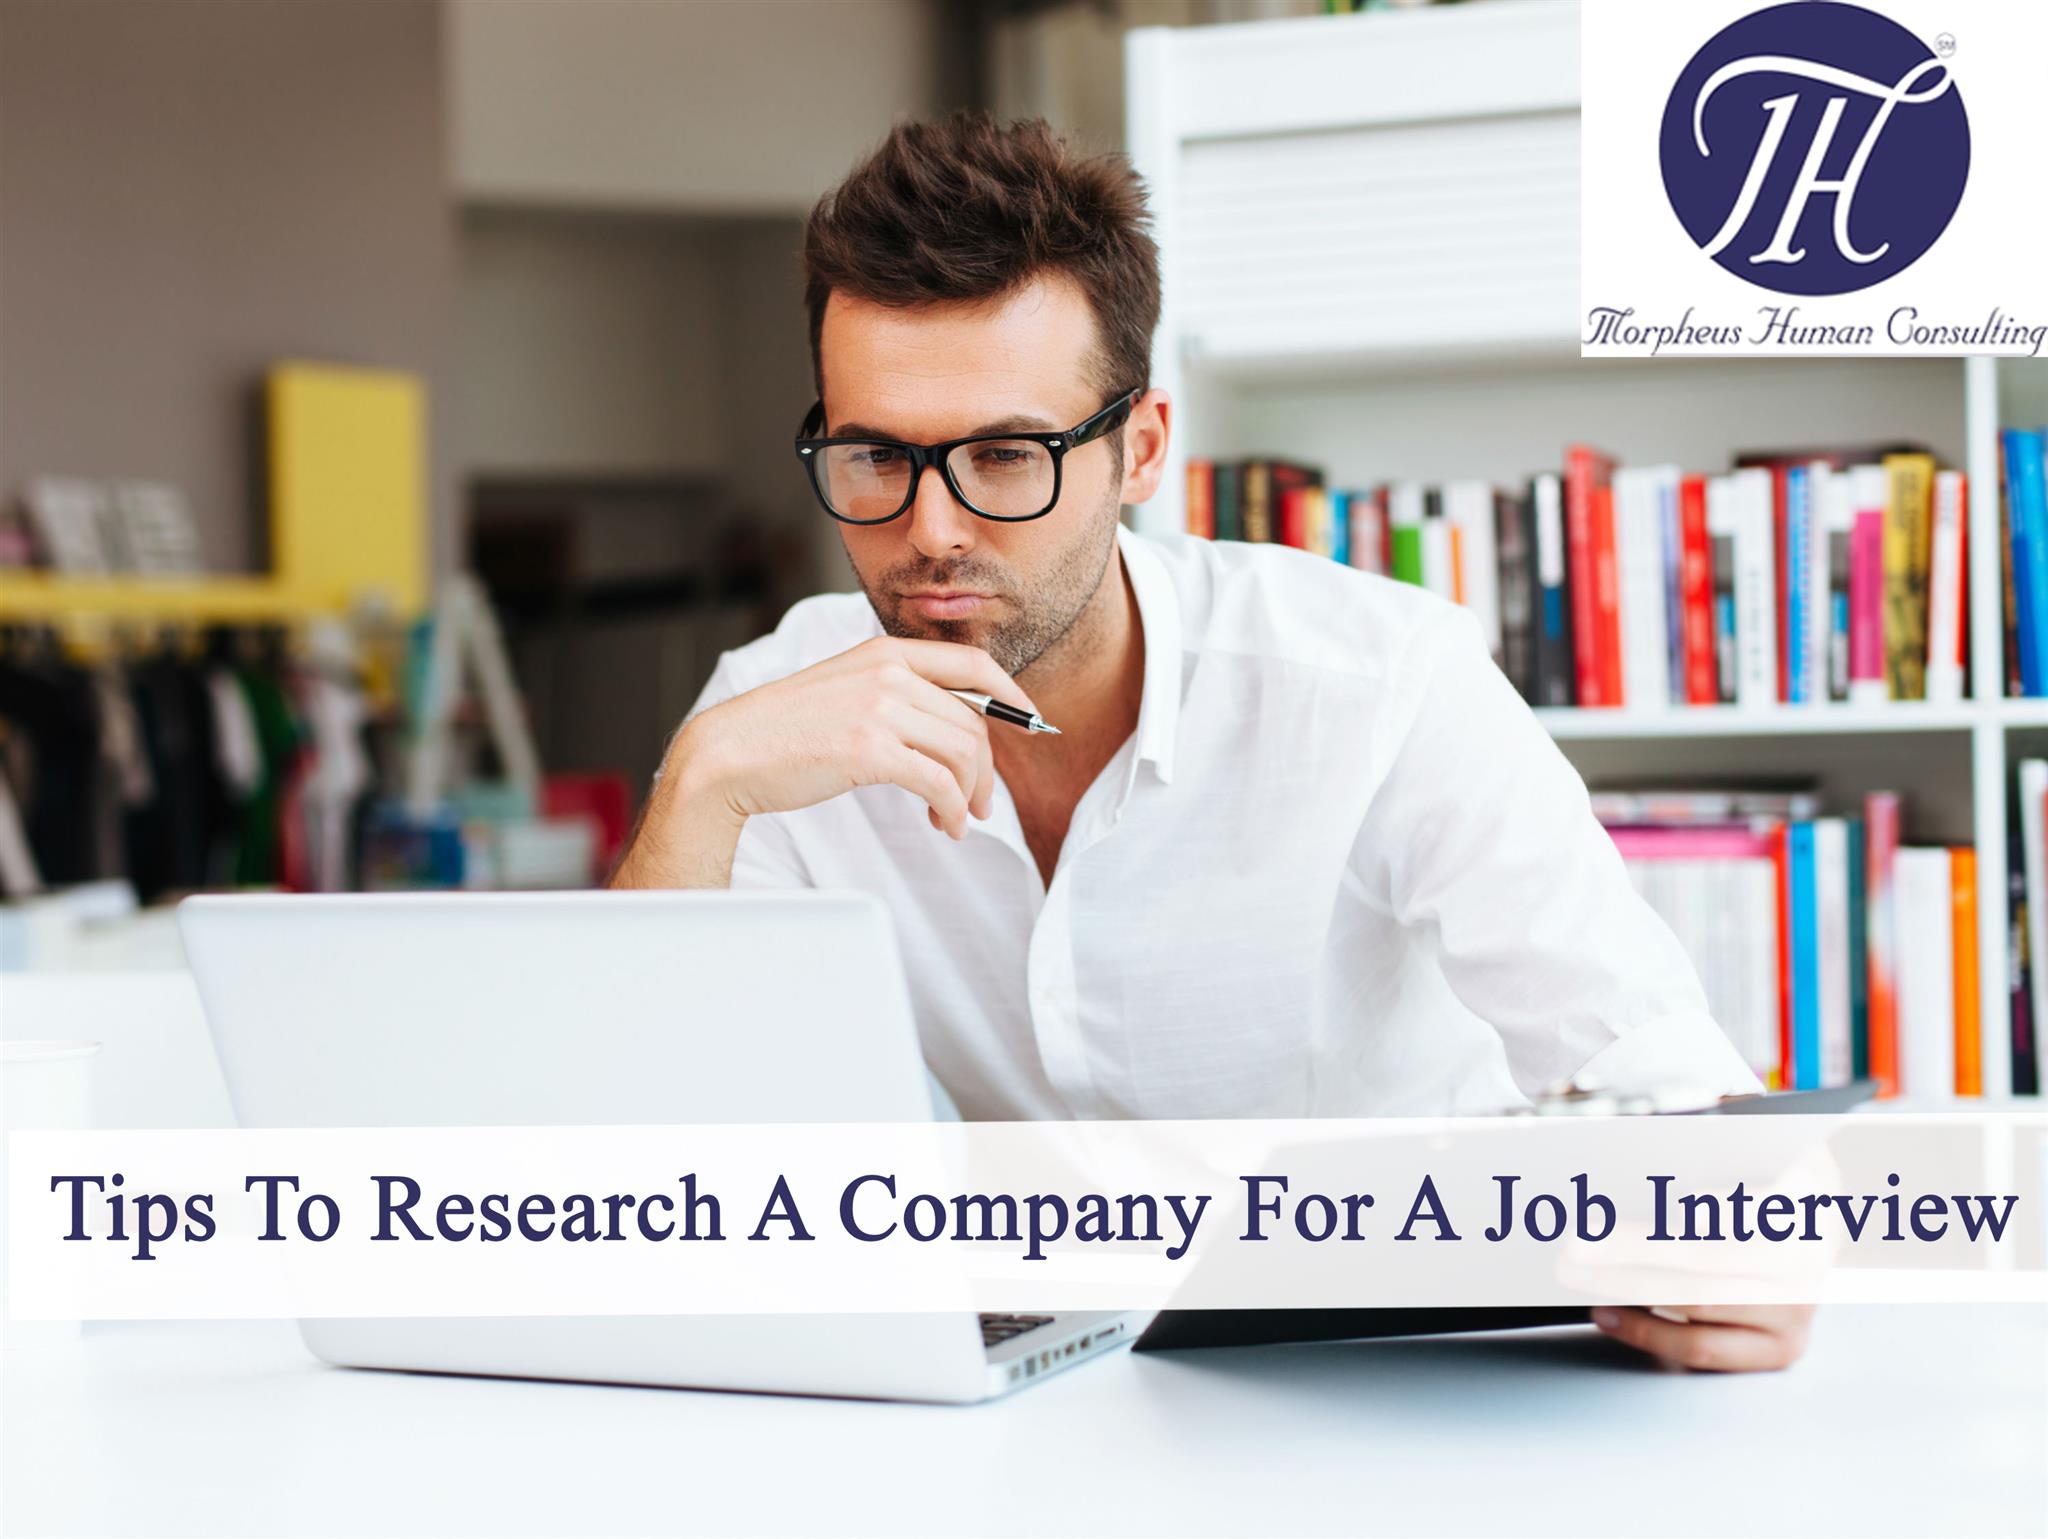 research the company and interview